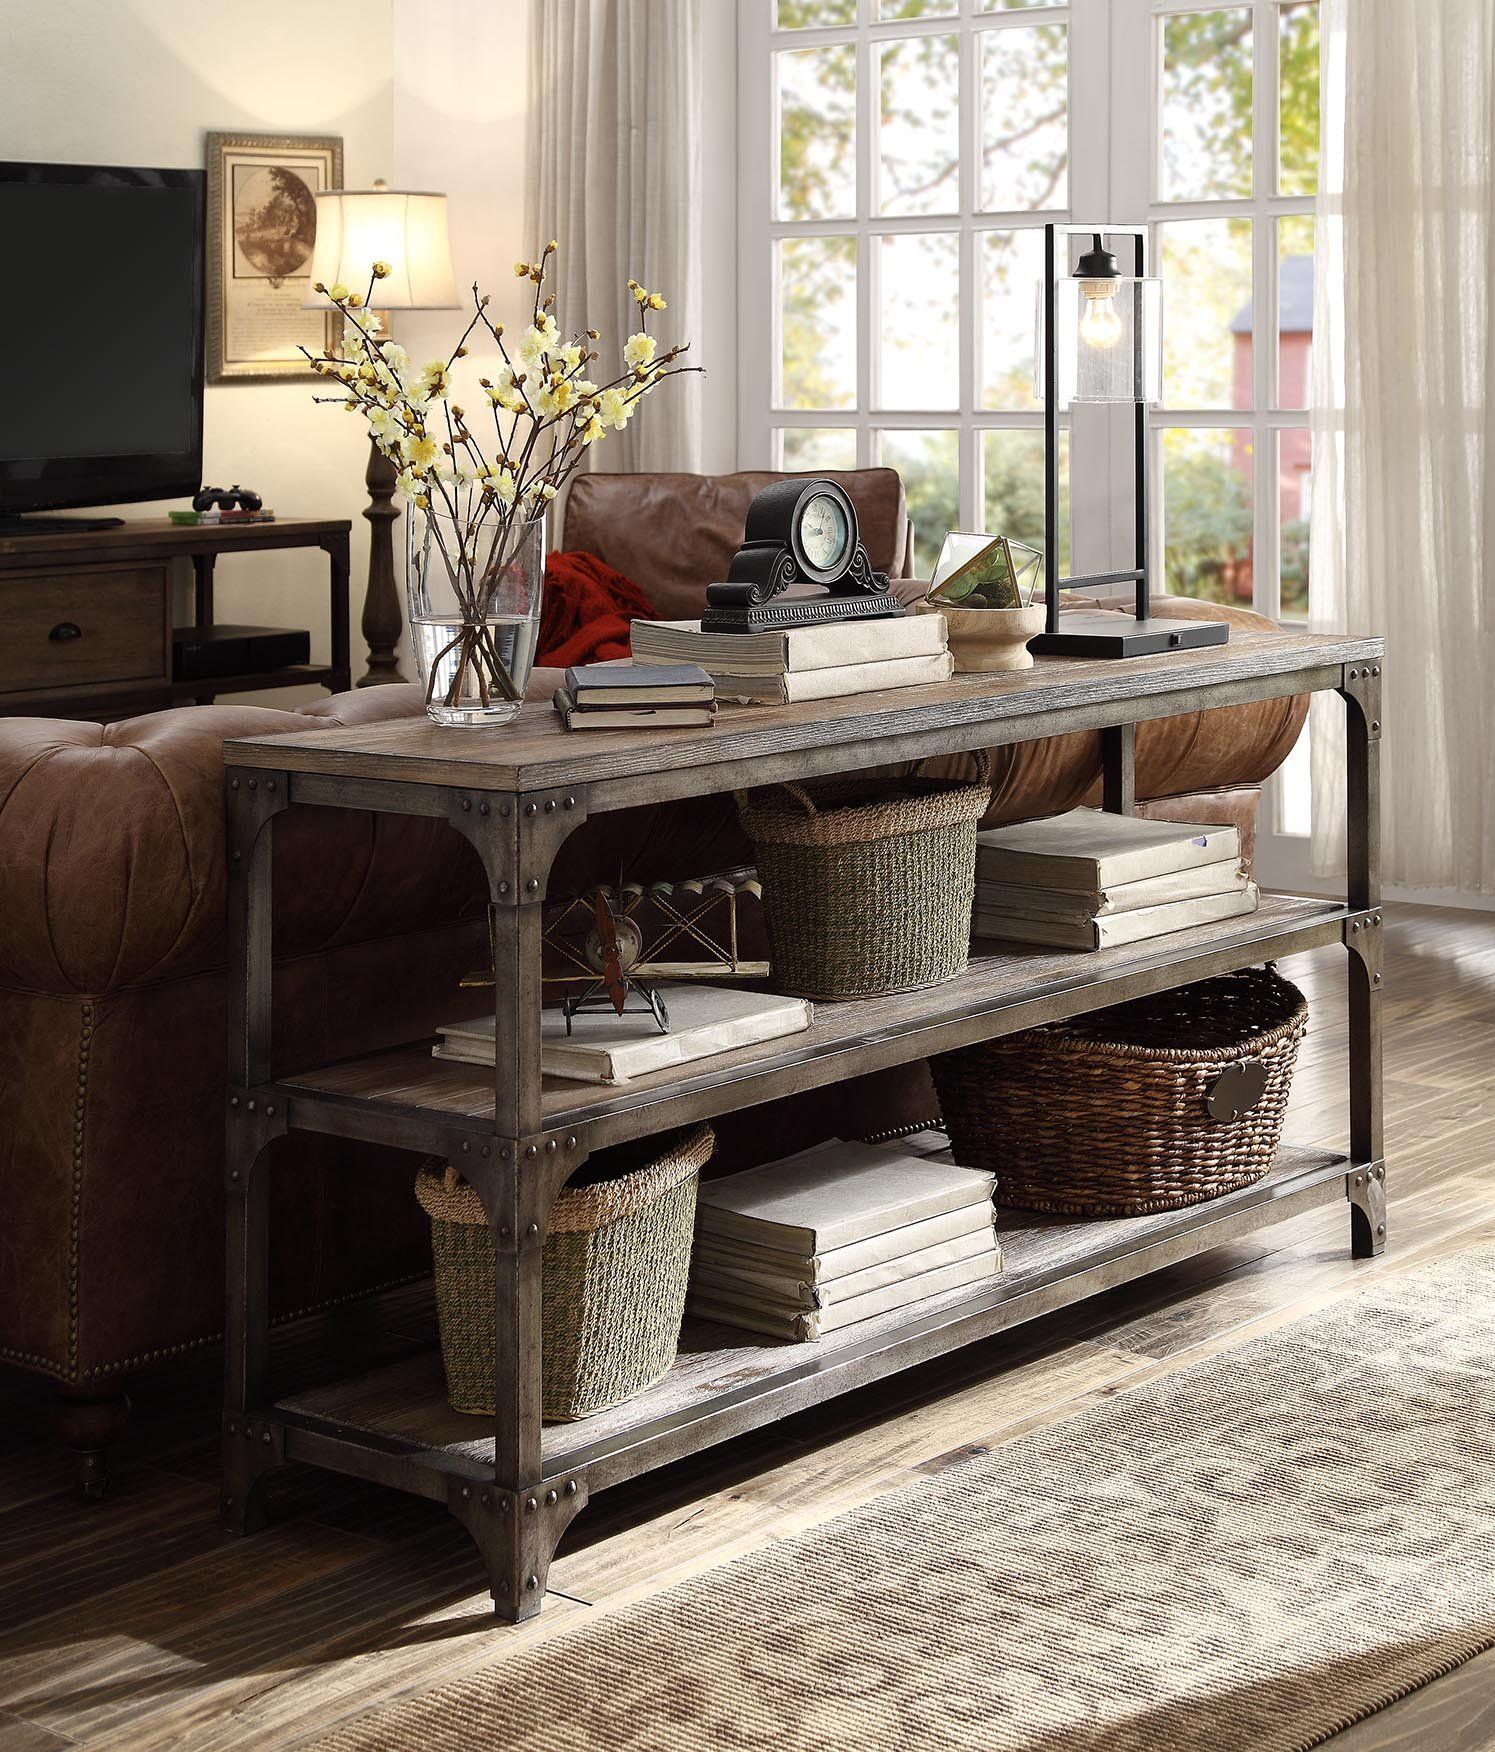 Rustic Weathered Oak And Metal Console | Sofa Table Decor, Silver For Metal And Oak Console Tables (View 15 of 20)